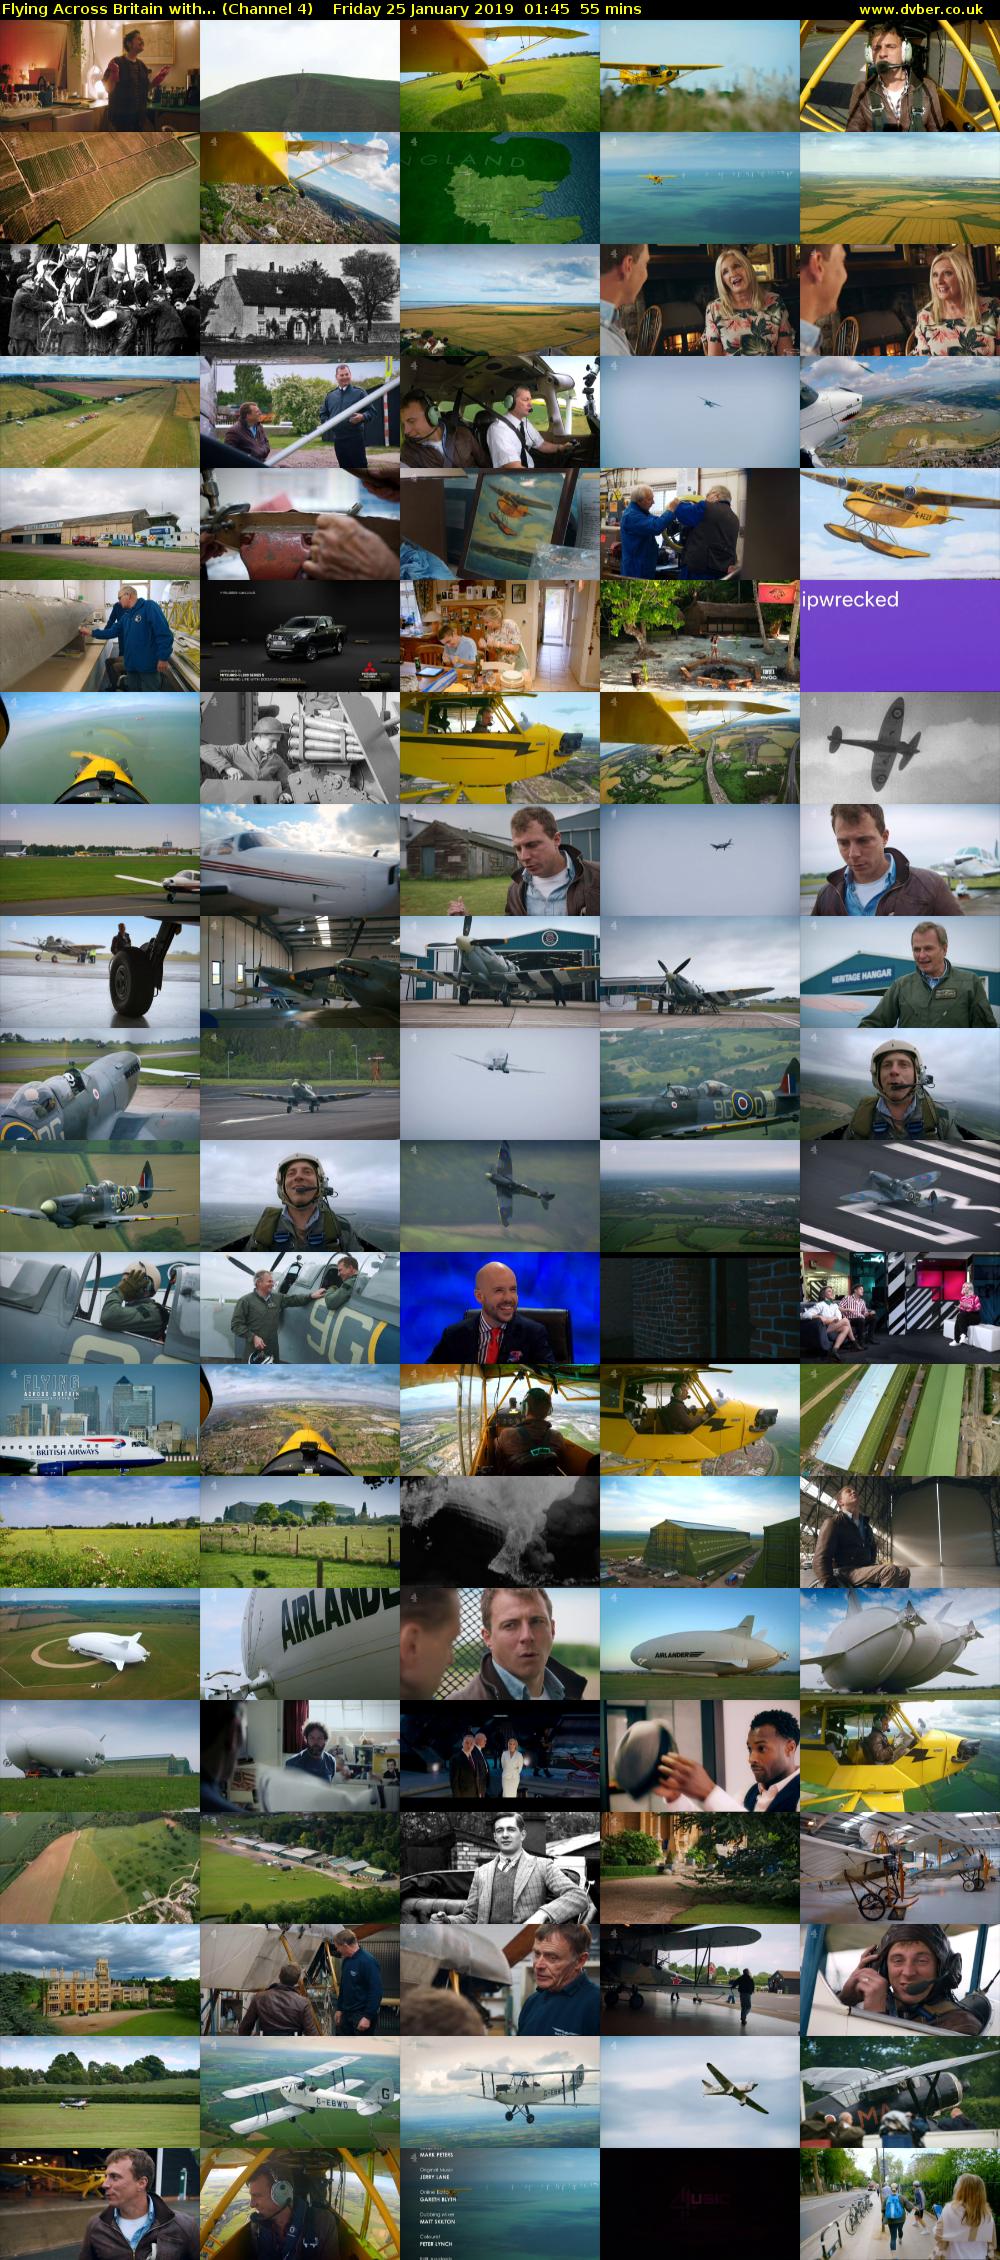 Flying Across Britain with... (Channel 4) Friday 25 January 2019 01:45 - 02:40